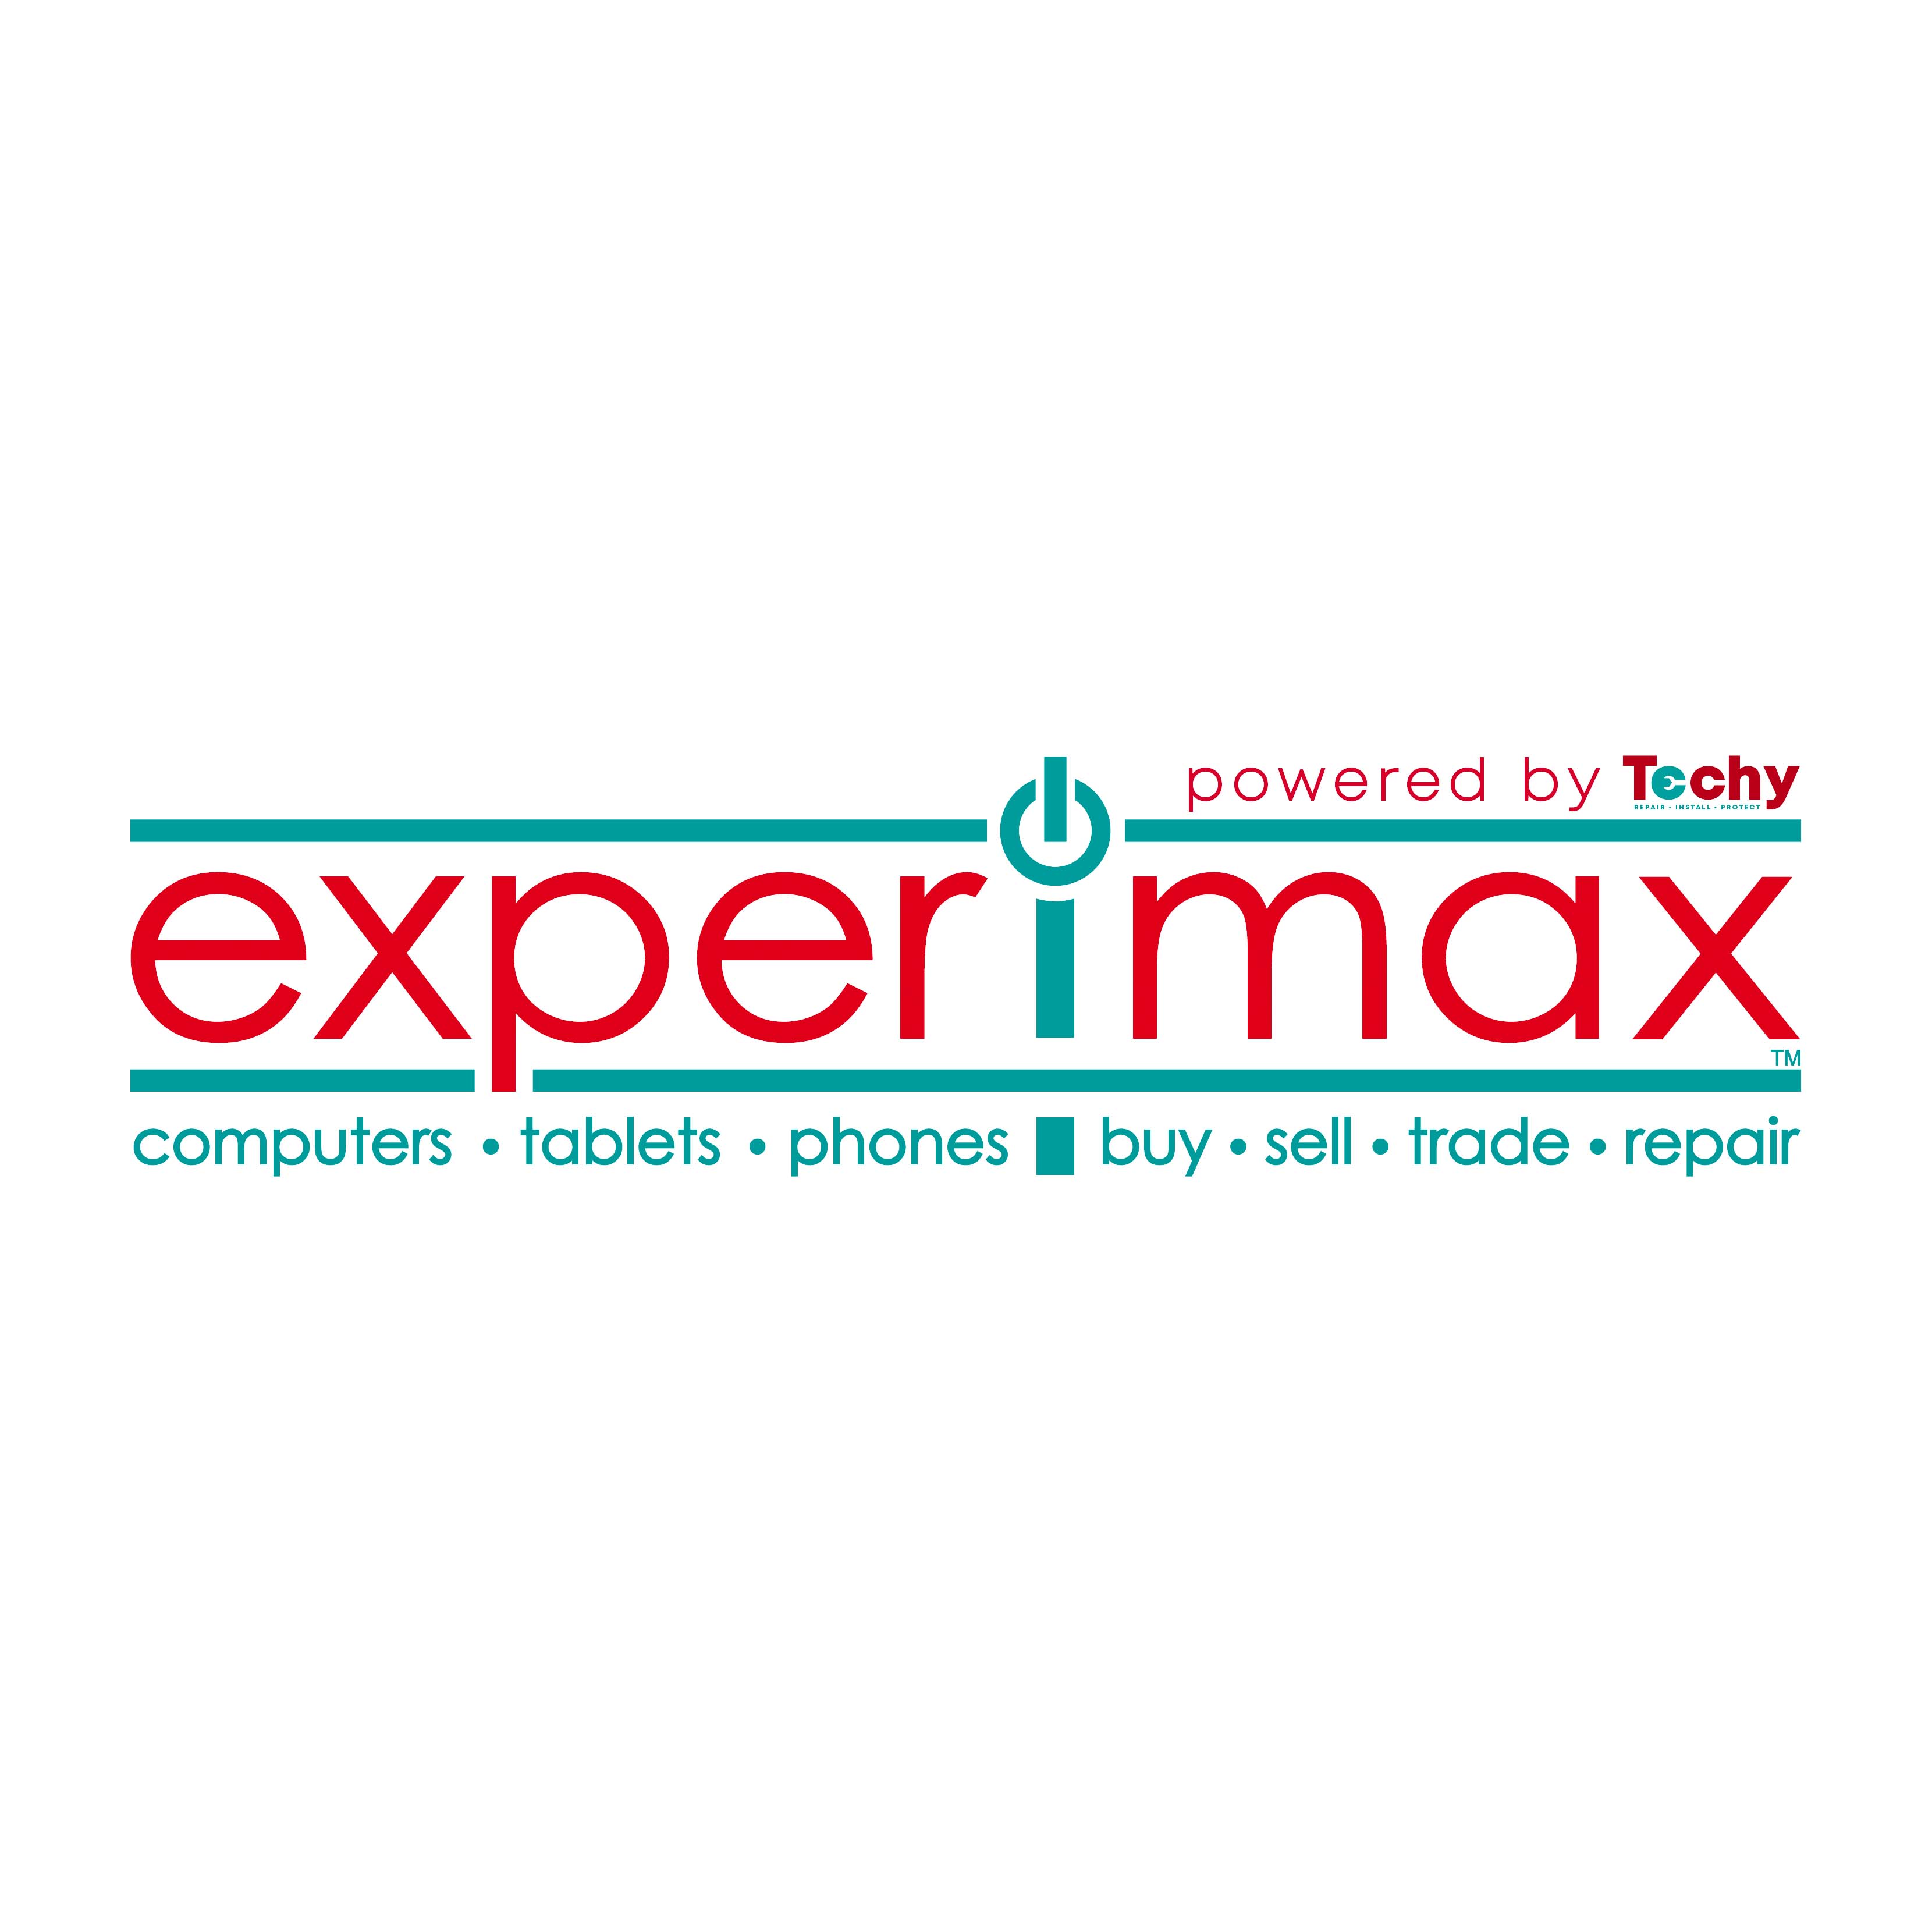 Experimax Clearwater, FL iPhones for Sale | iPads, Mac Computers for Sale 